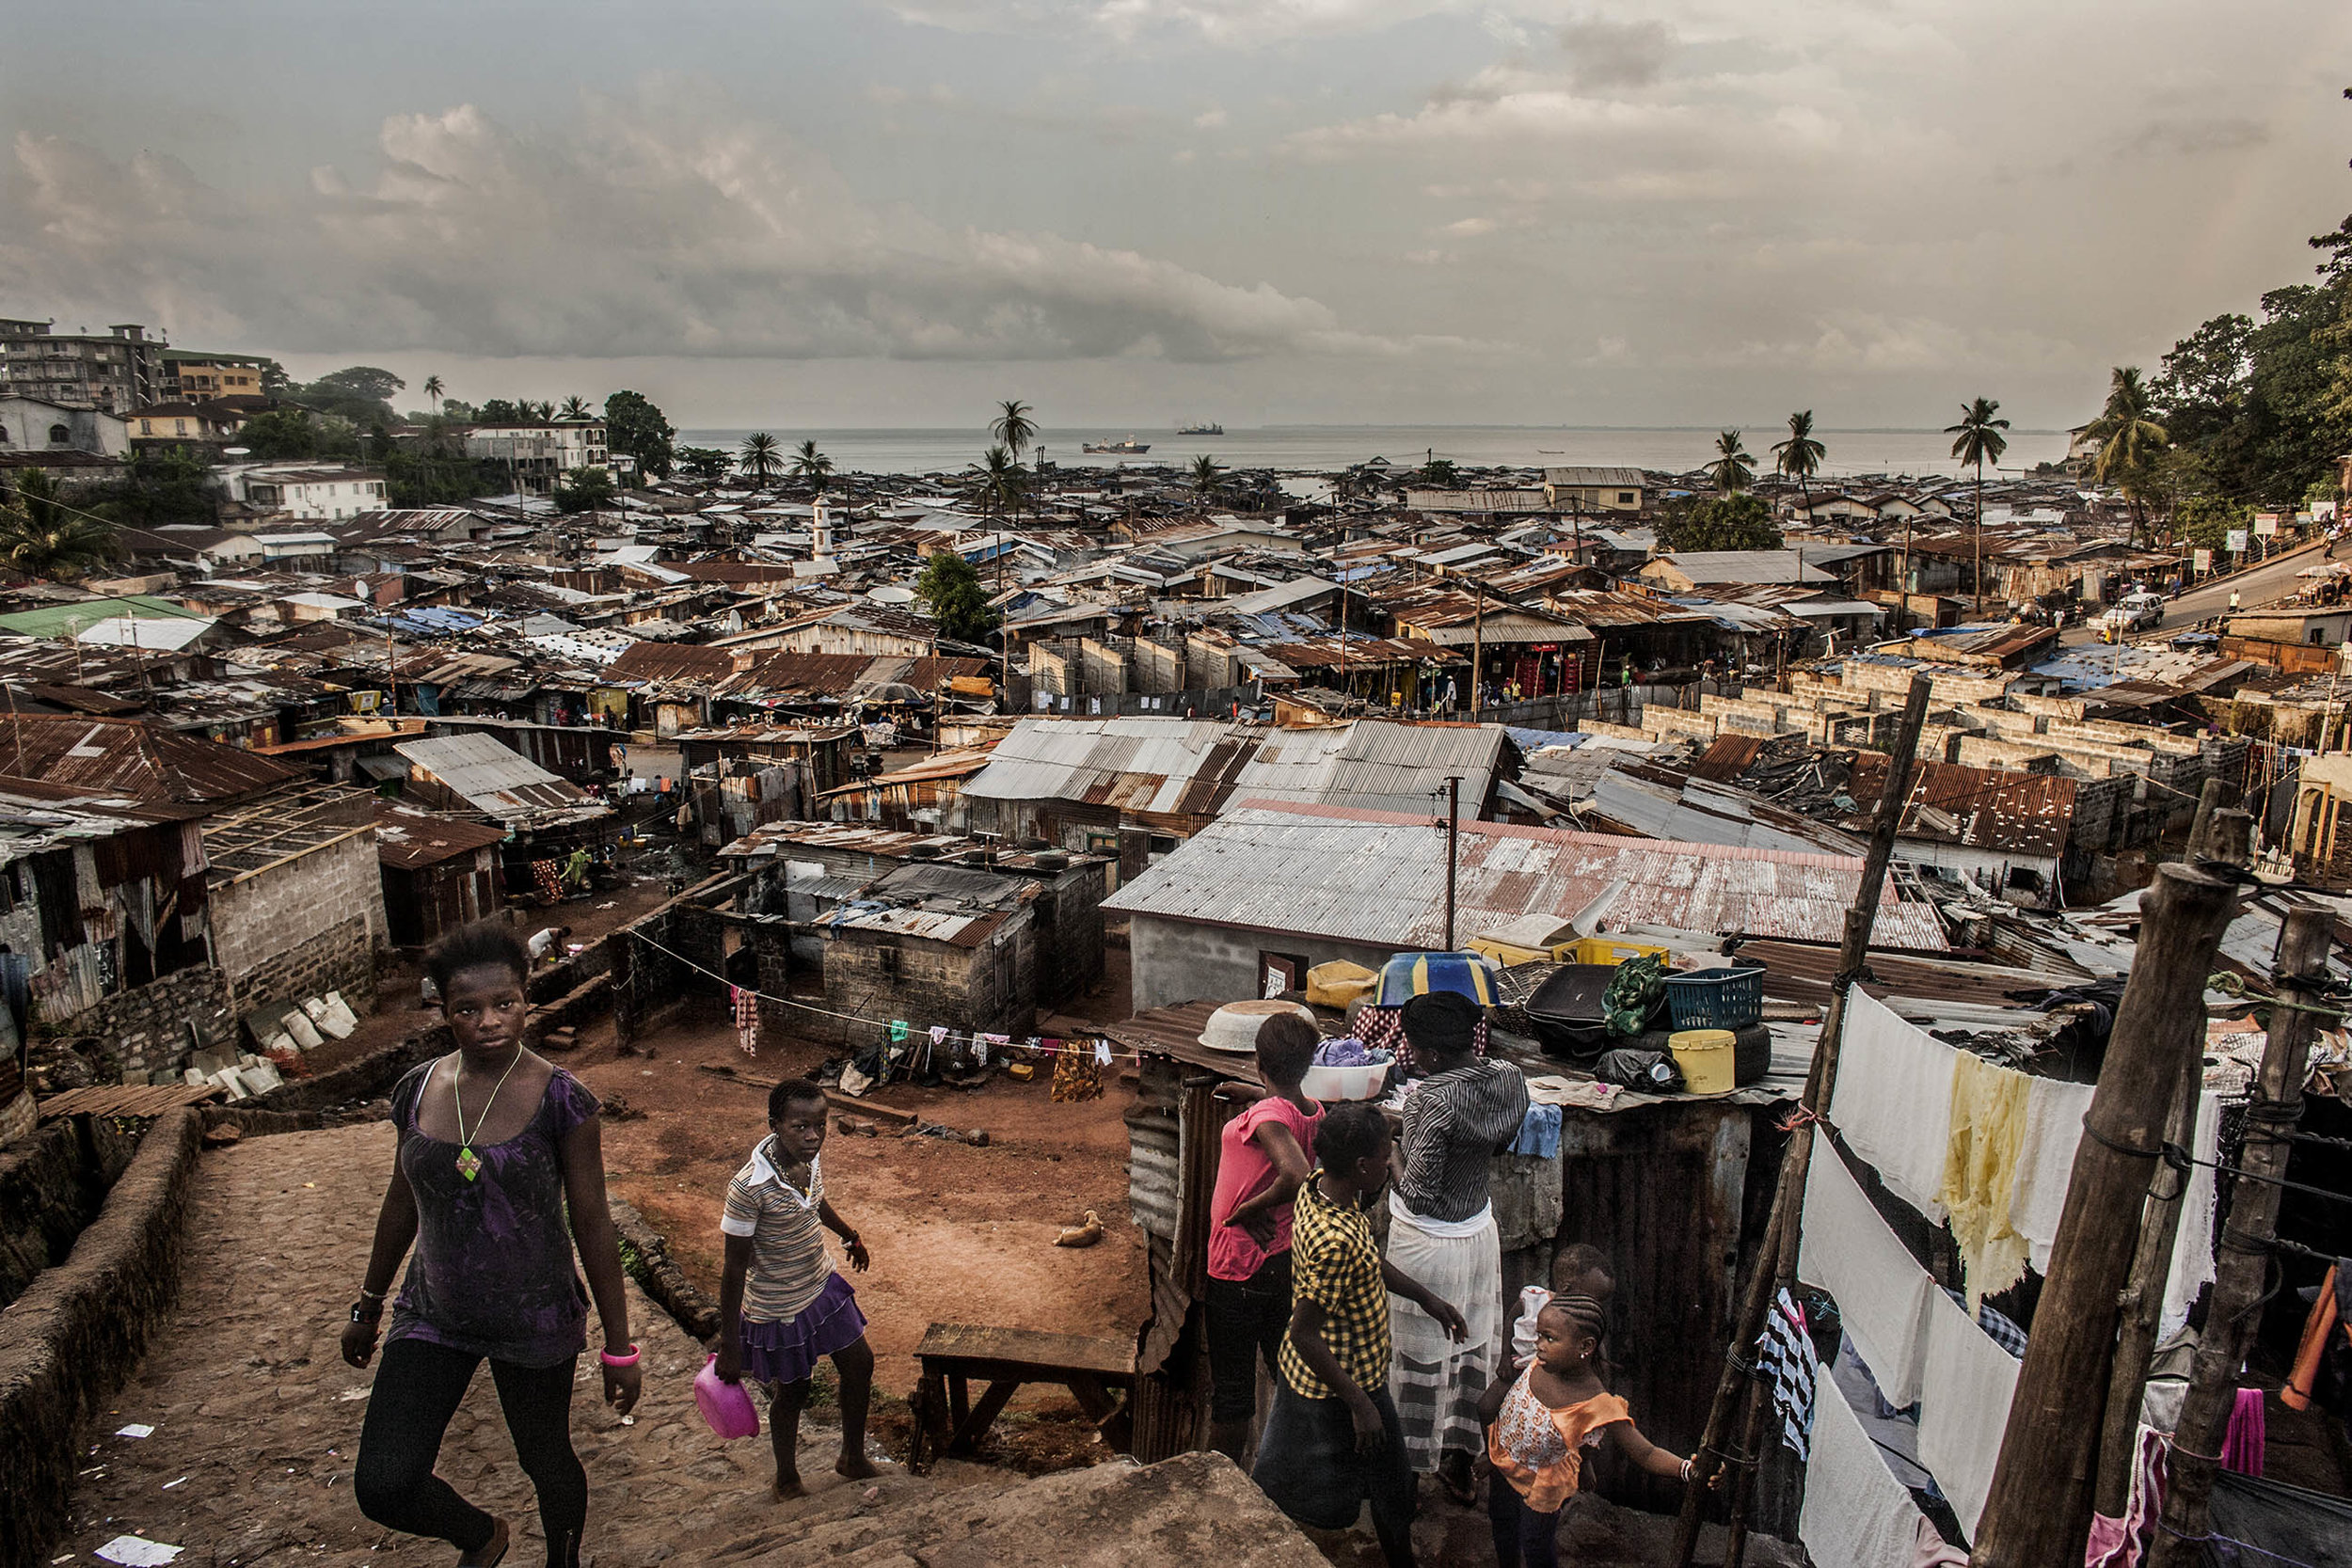  A look over the Kroo Bay neighborhood of Freetown, Sierra Leone. (Pete Muller/Prime for National Geographic) 